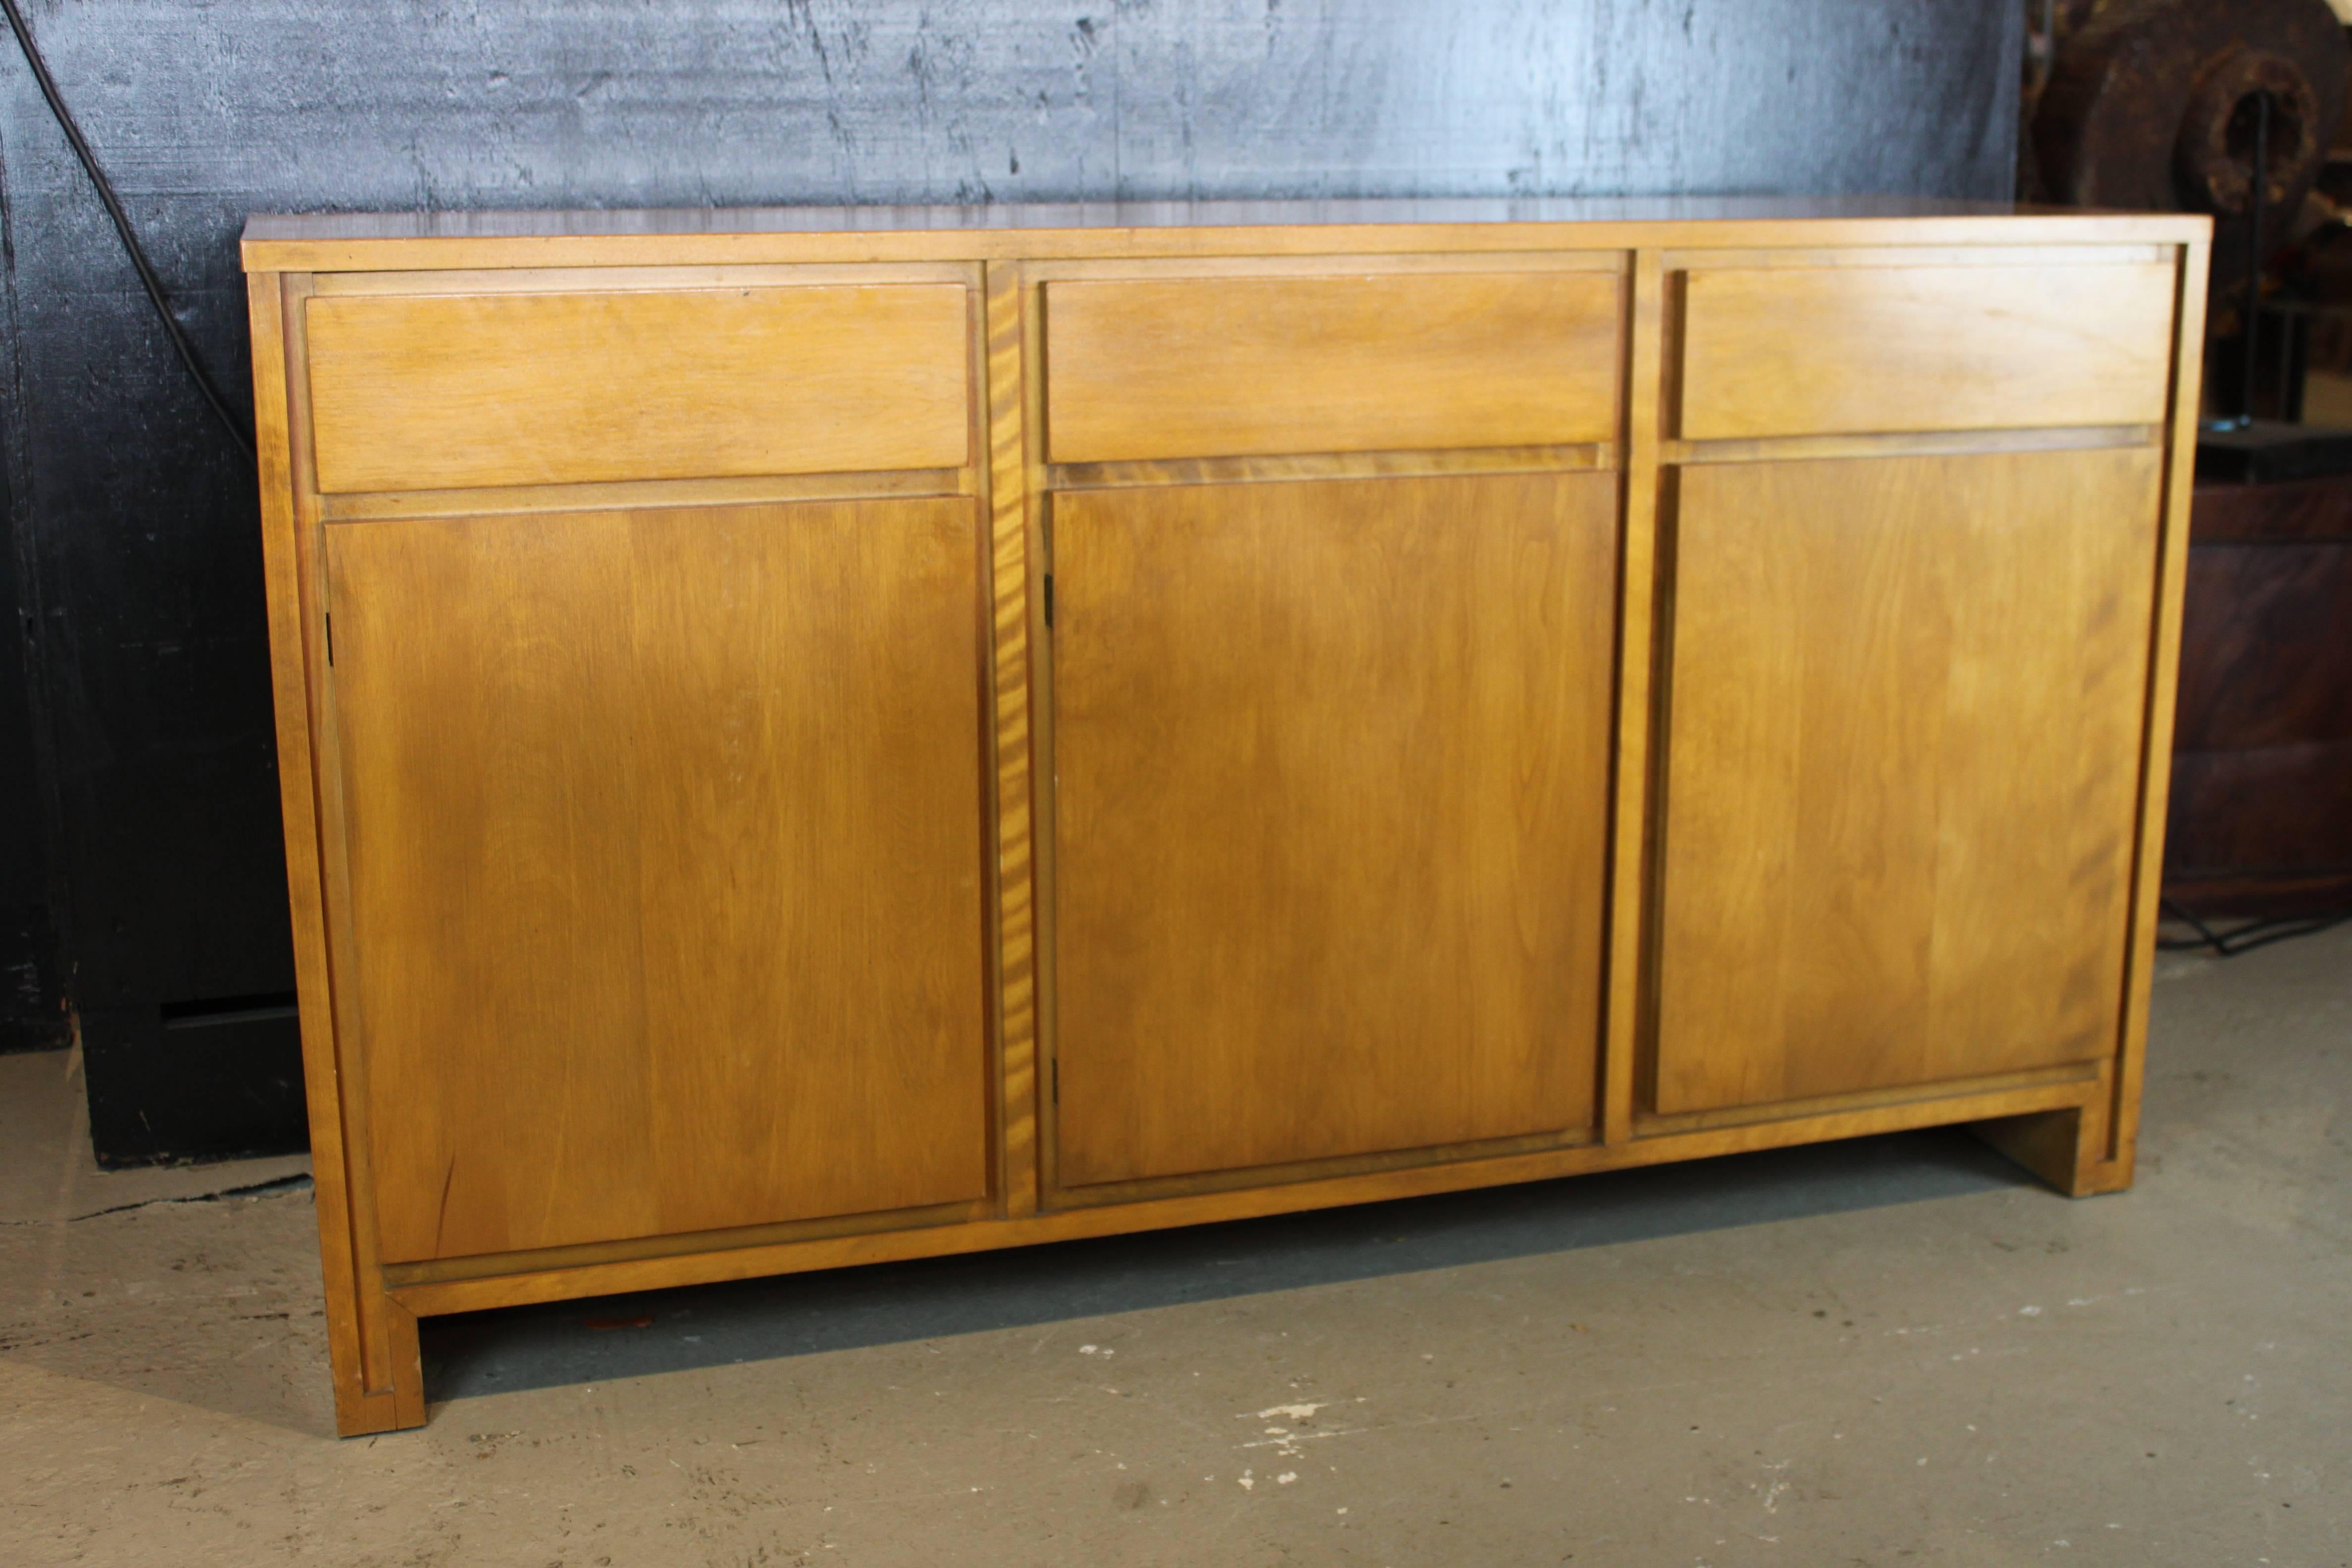 Solid maple wood sideboard designed by Russell Wright for Conant Ball in original finish. Overall in mint condition. Few minor nicks on the wood.